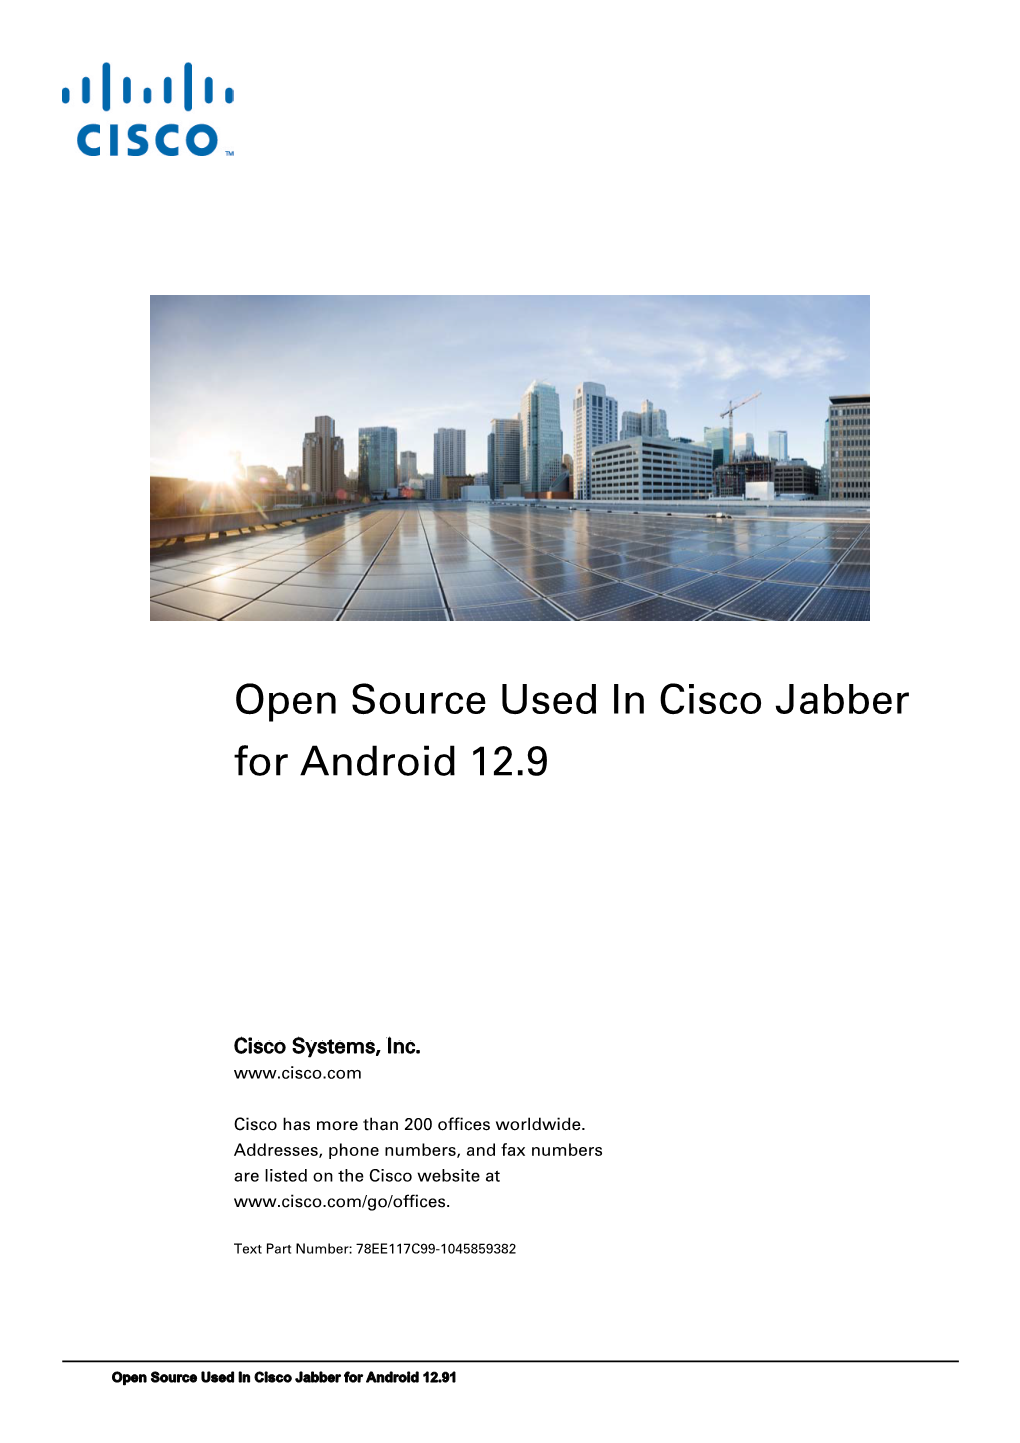 Open Source Used in Cisco Jabber for Android 12.9